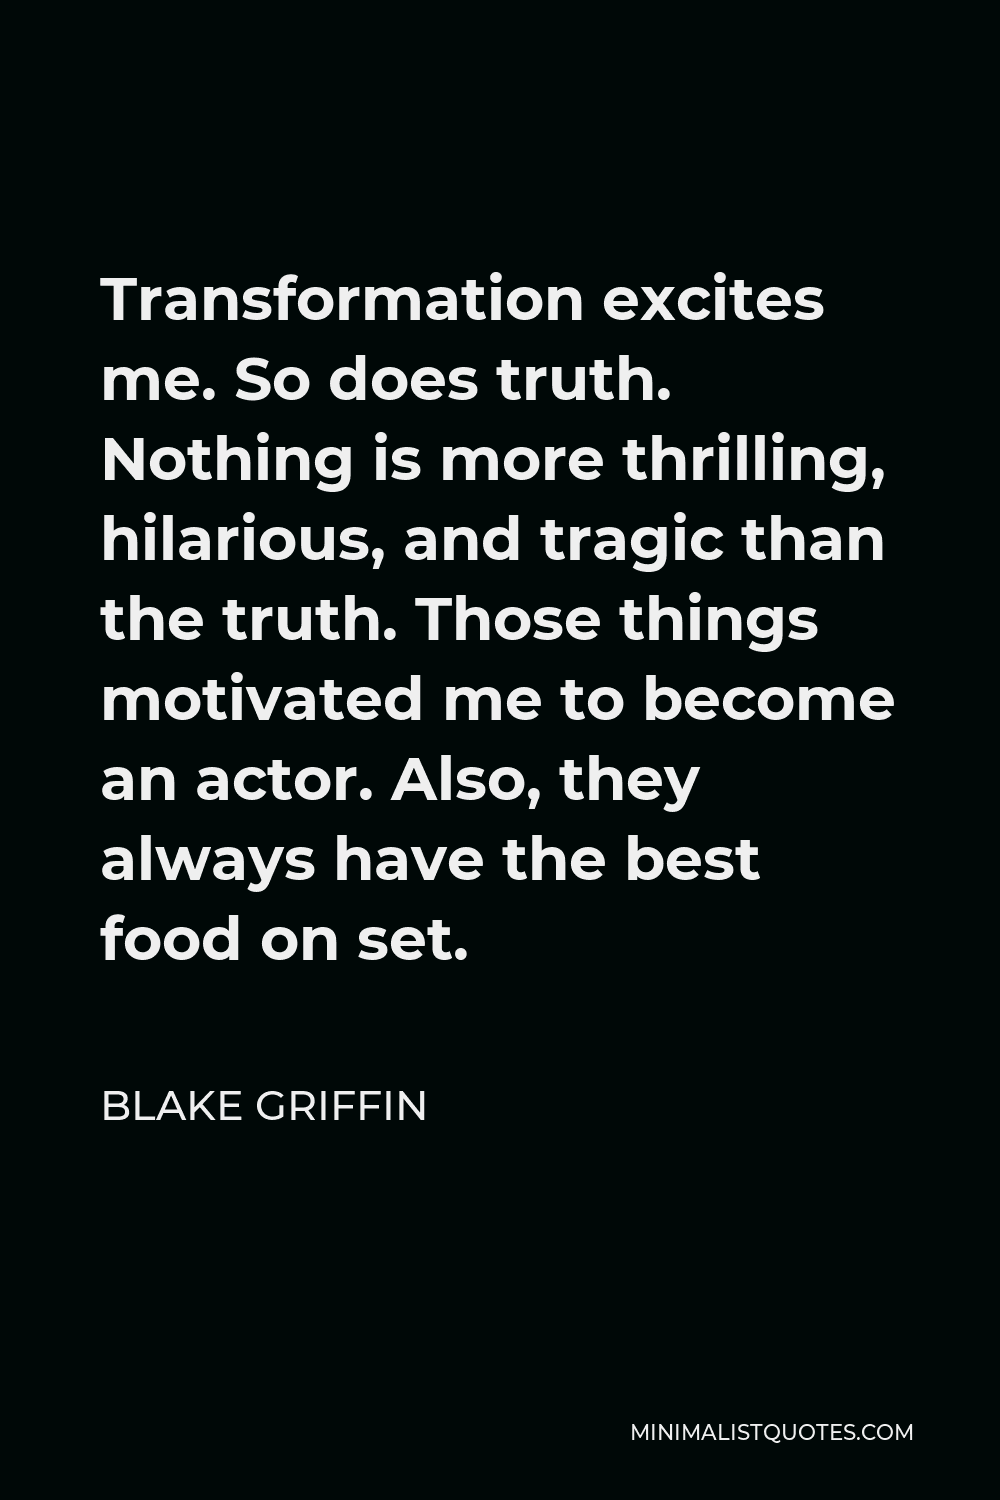 Blake Griffin Quote - Transformation excites me. So does truth. Nothing is more thrilling, hilarious, and tragic than the truth. Those things motivated me to become an actor. Also, they always have the best food on set.